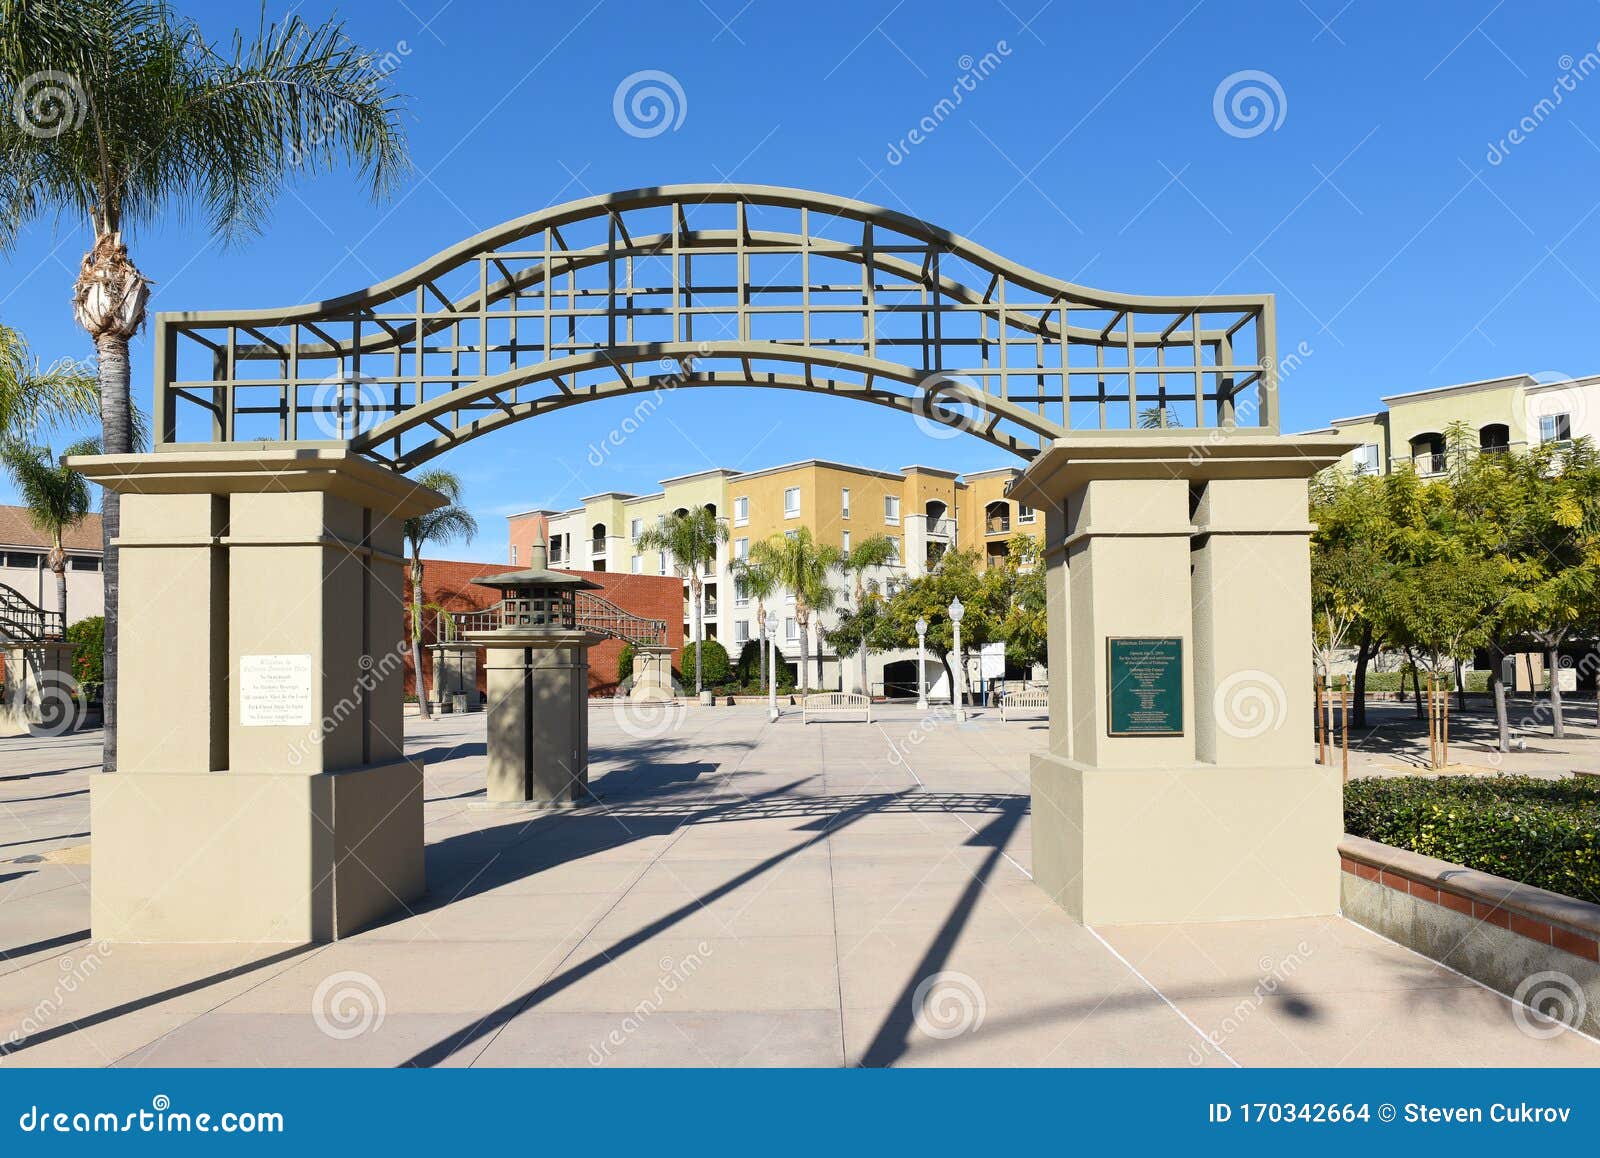 Fullerton Downtown Plaza is a 1.2 Acre Space Surrounding the Fullerton ...